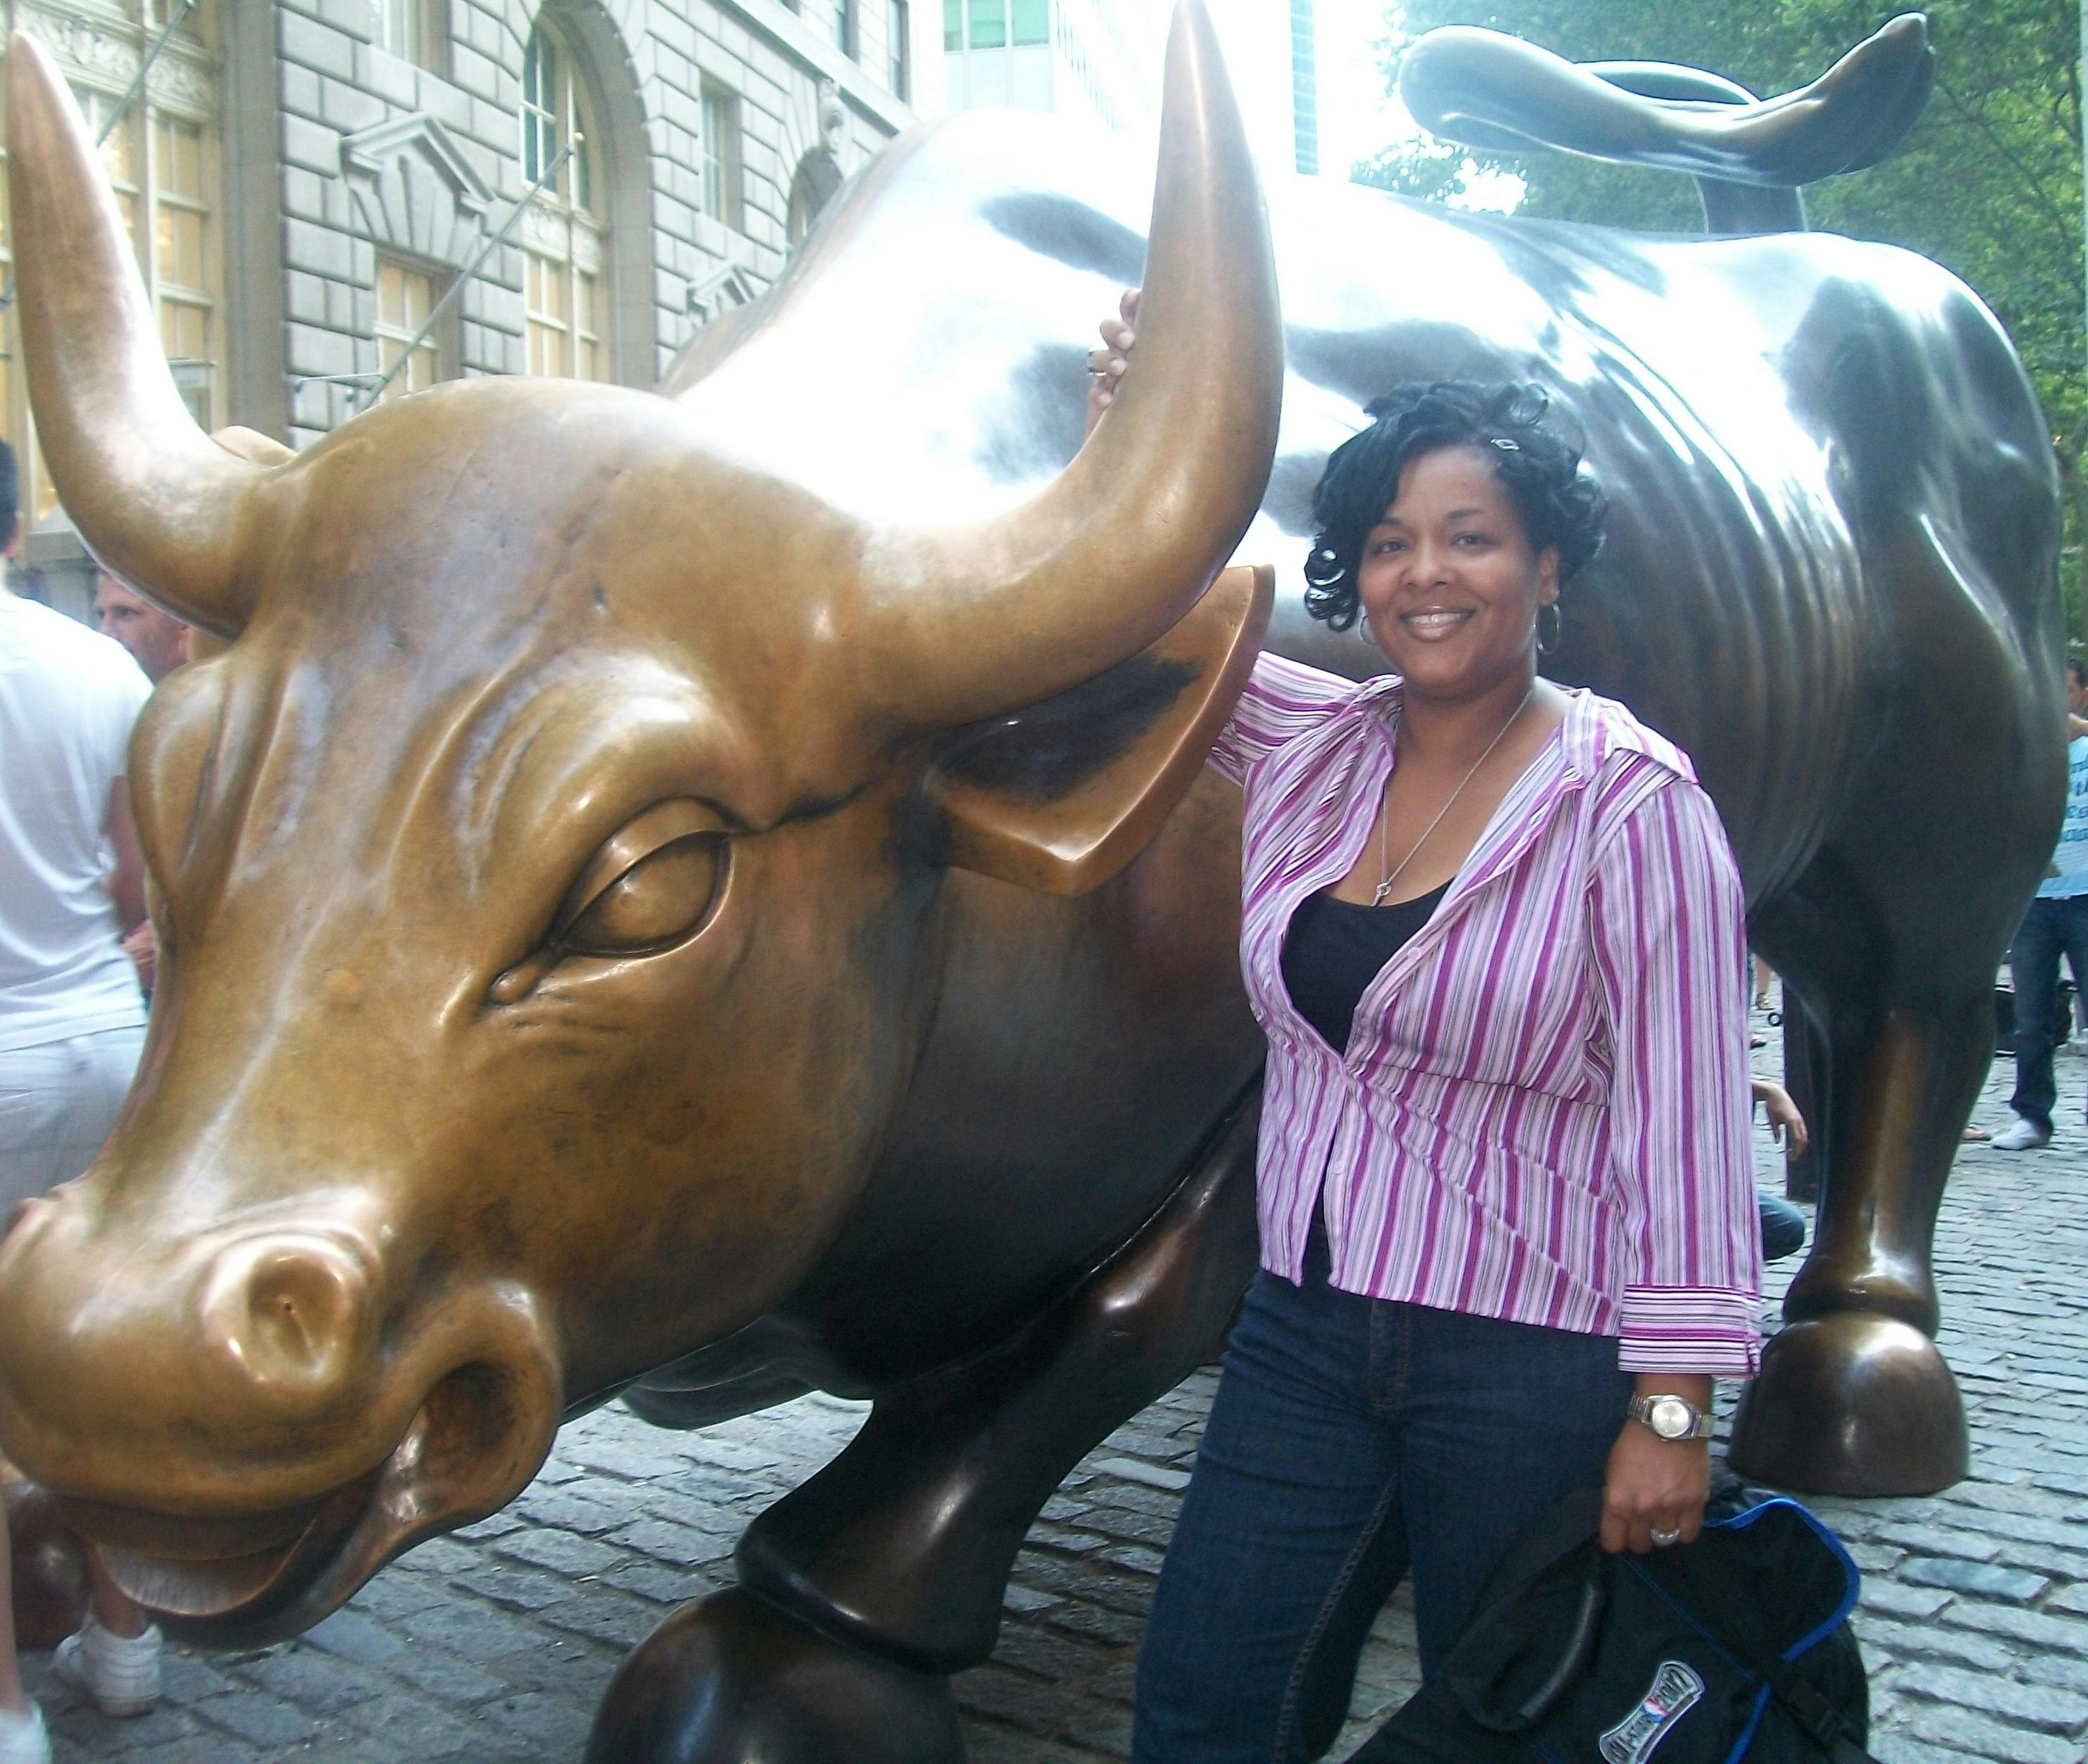 Free stock photo of Woman on Wall Street by Bull